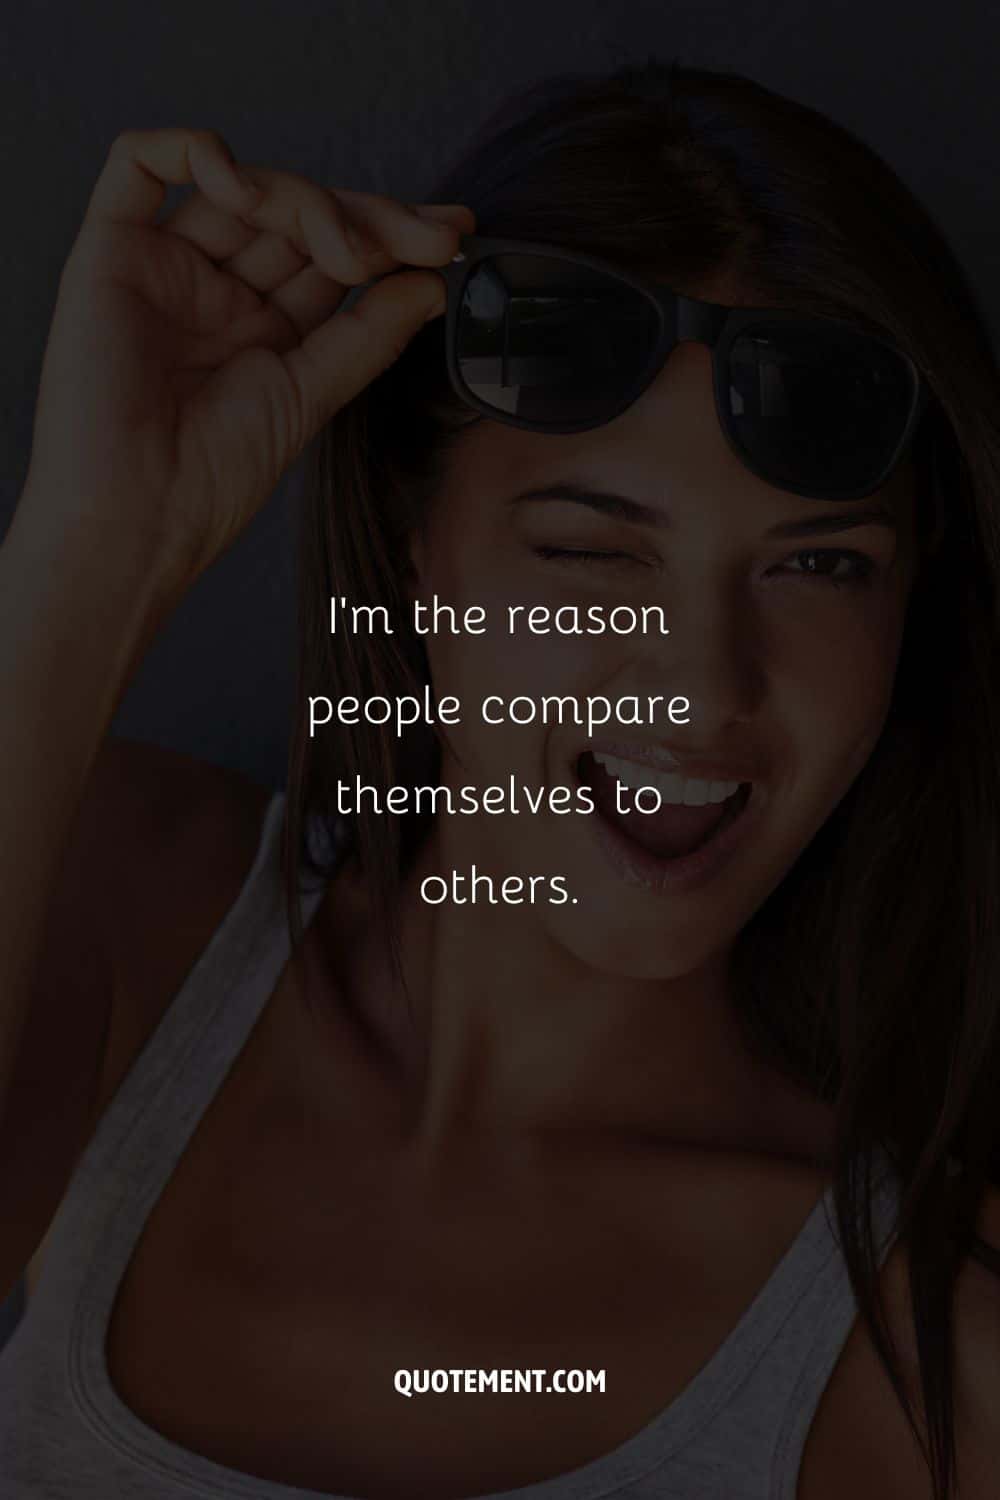 I’m the reason people compare themselves to others.